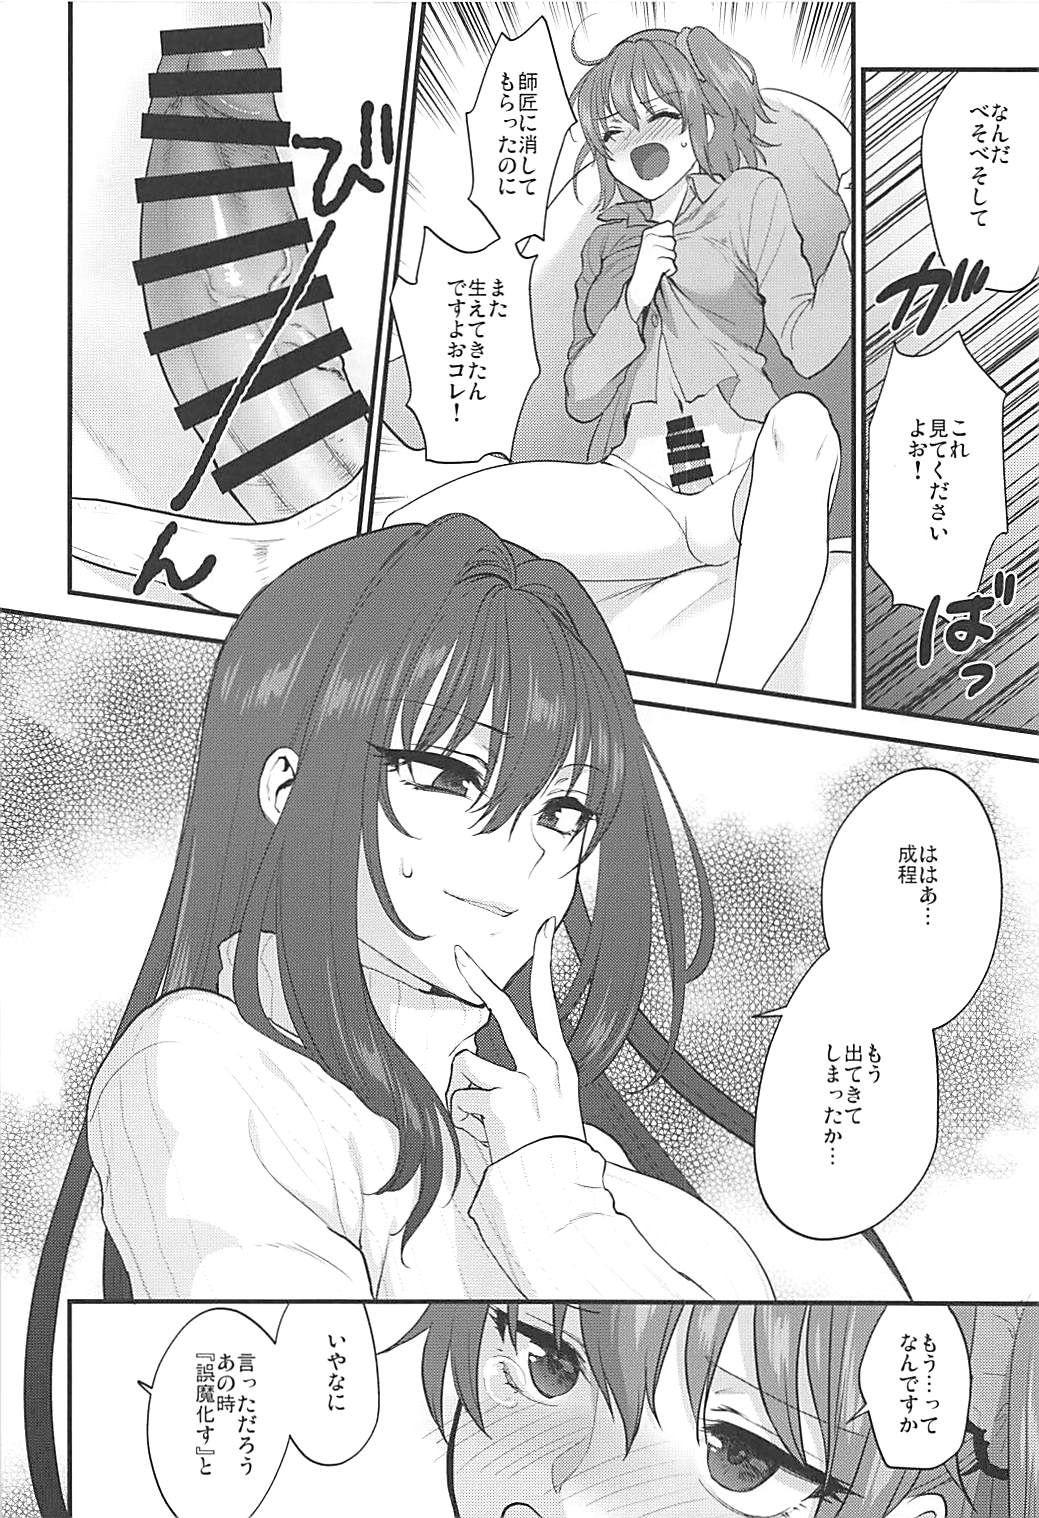 Amatuer Sex In my room. - Fate grand order Usa - Page 5